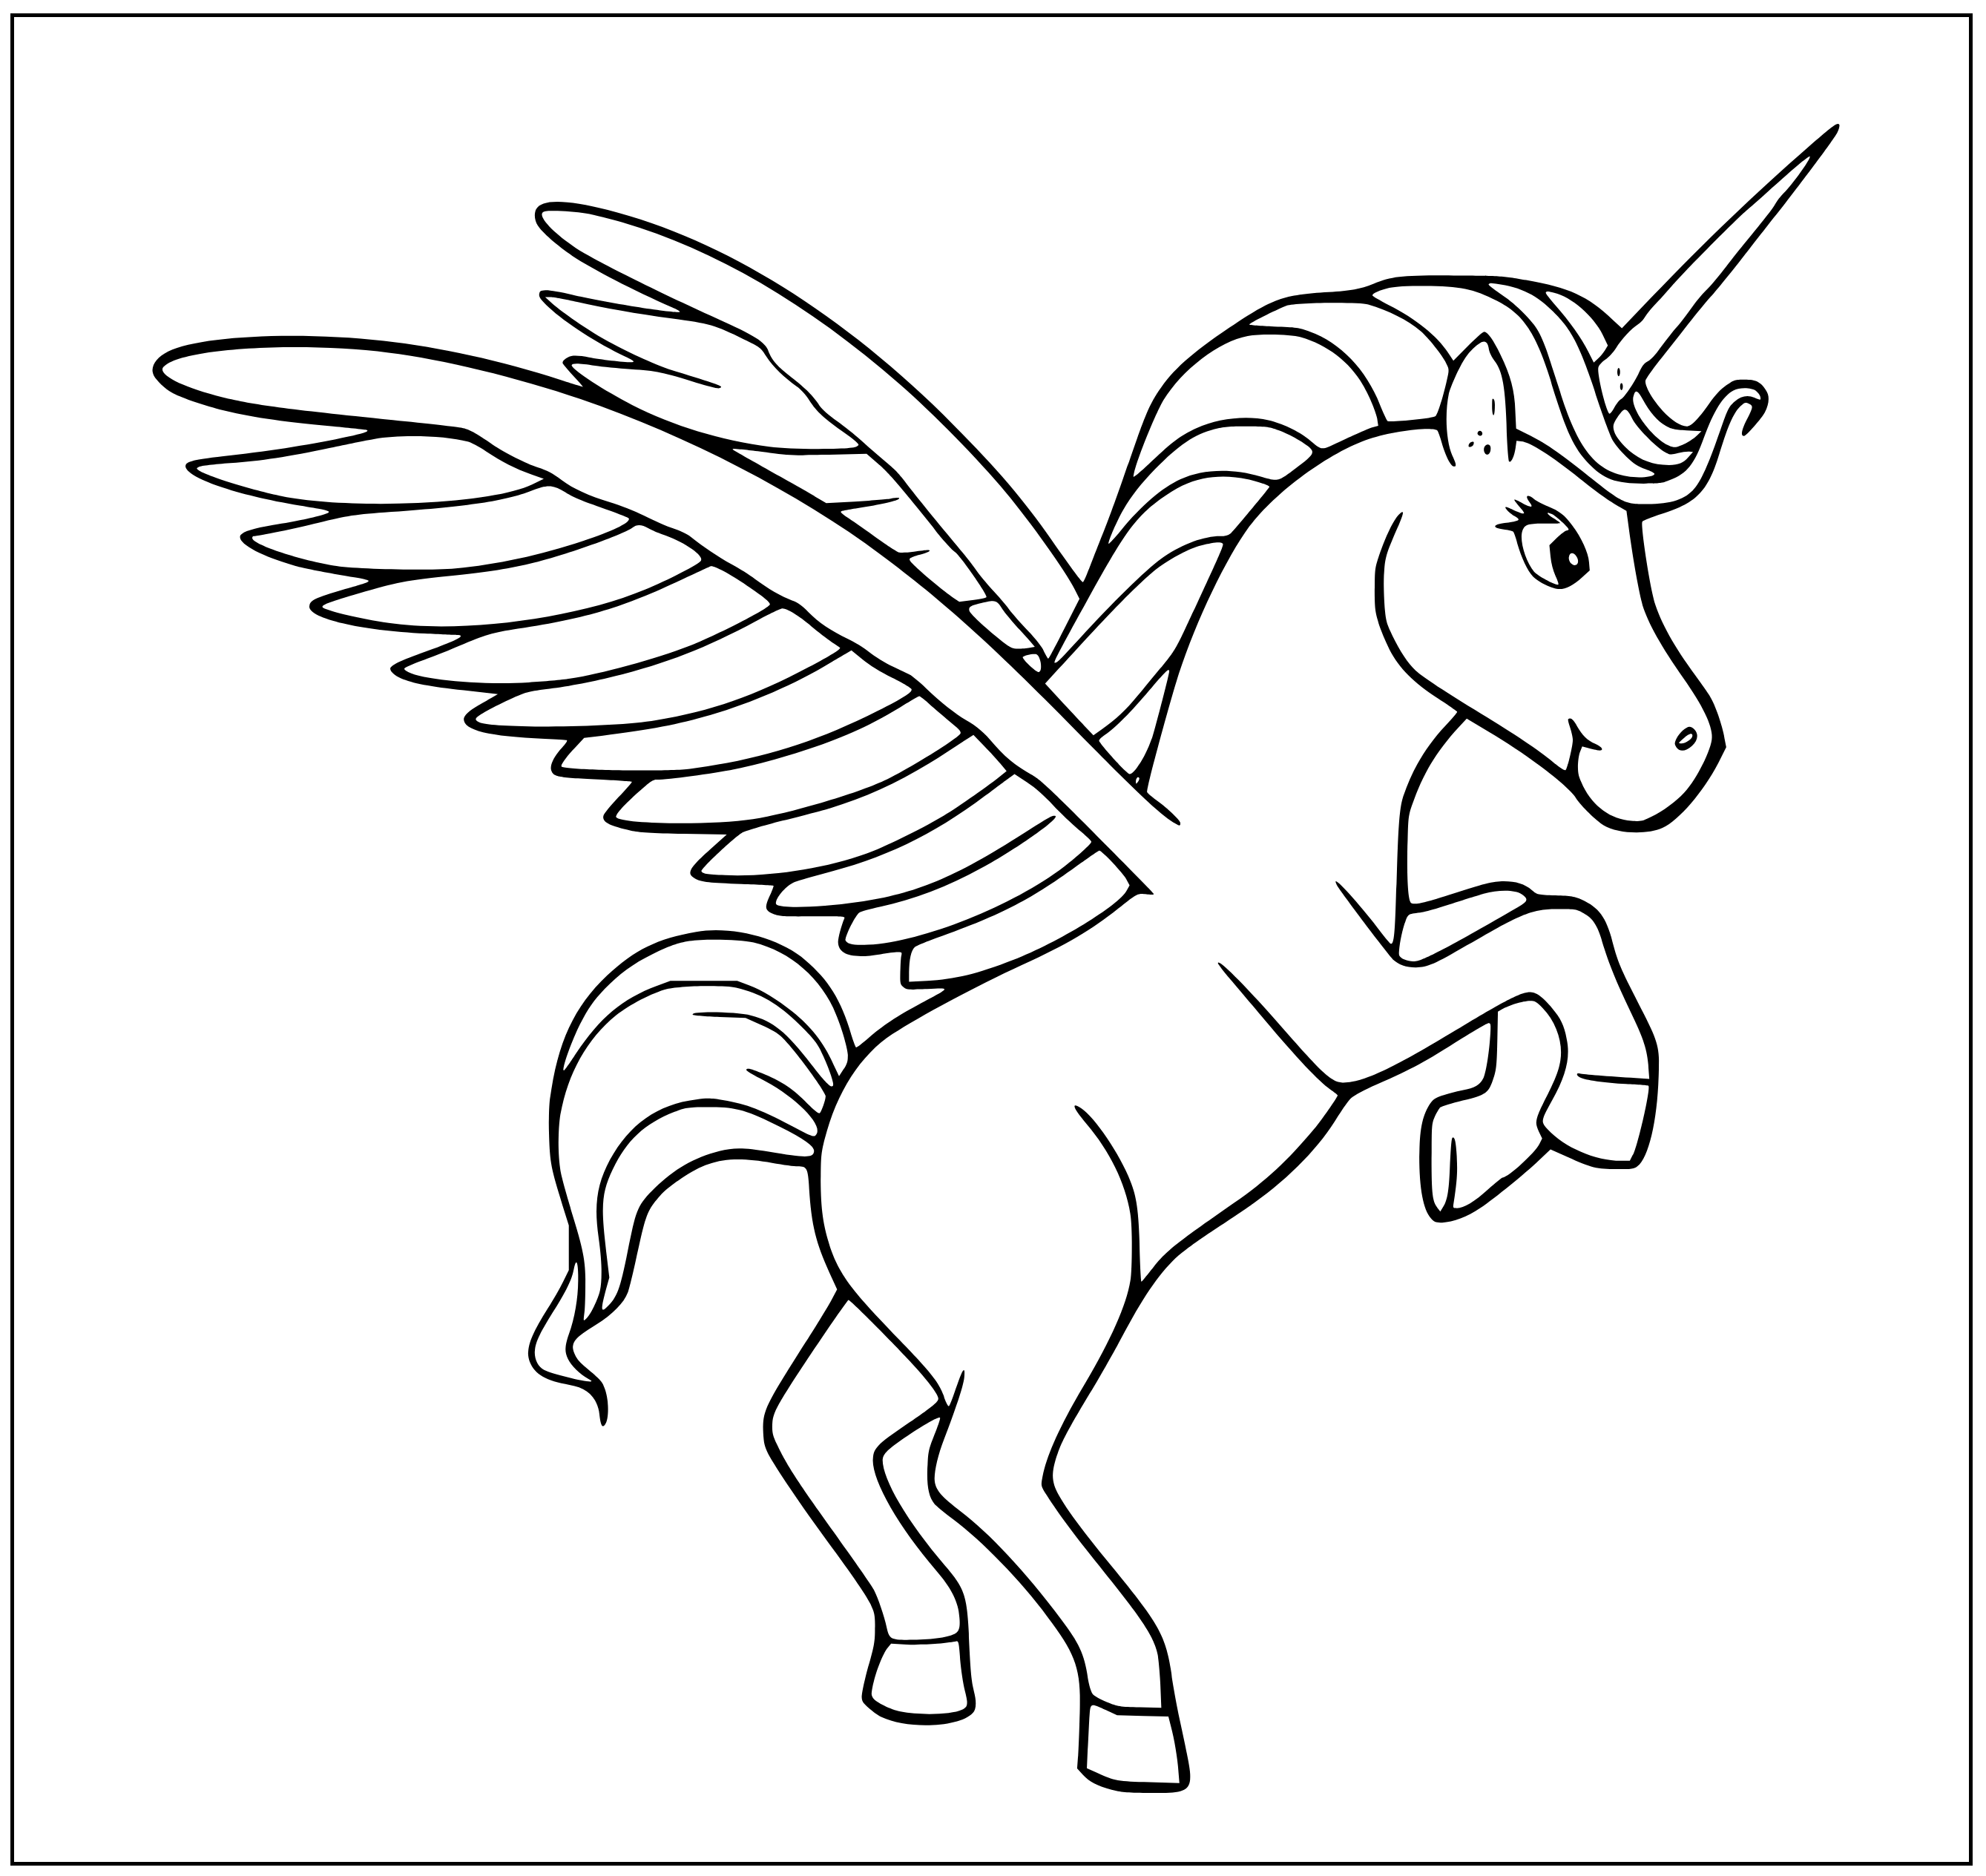 Printable Flying Alicorn black and white Coloring Page for kids.